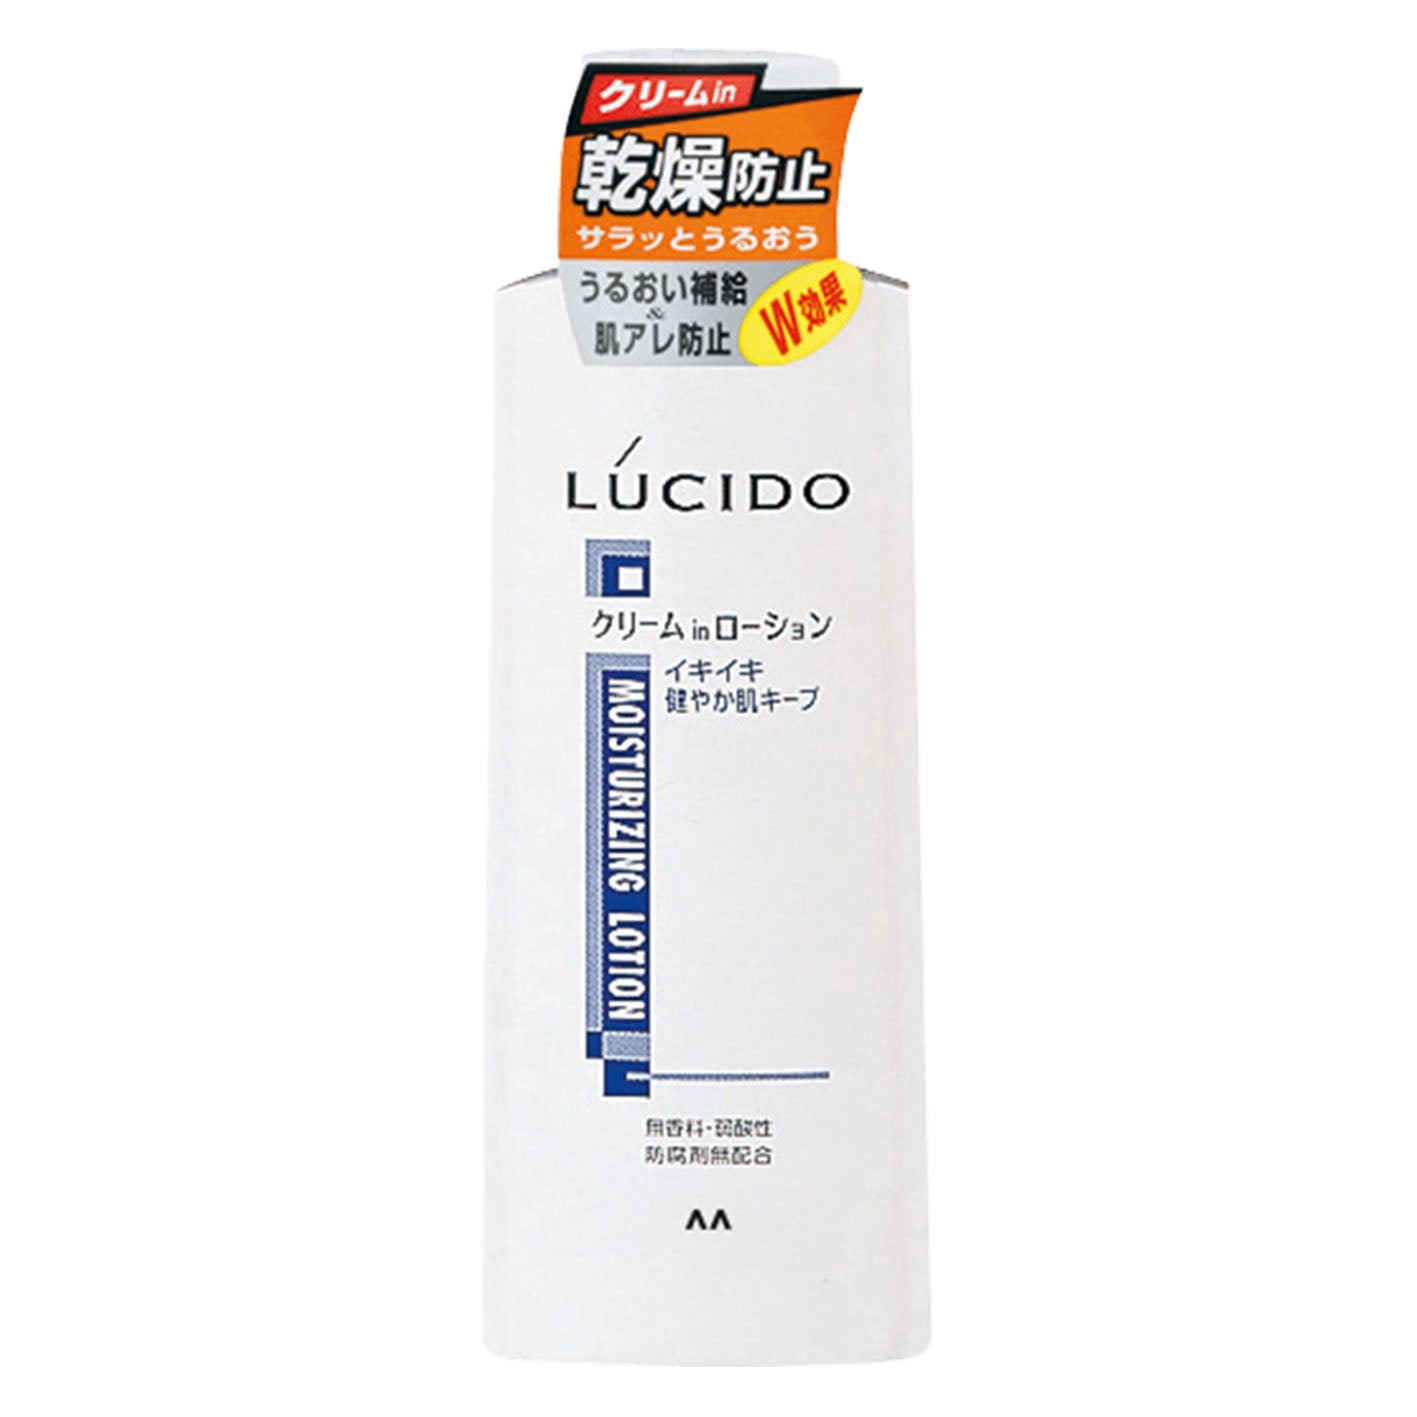 Lucido Dry Prevention Lotion 140ml - Harajuku Culture Japan - Japanease Products Store Beauty and Stationery